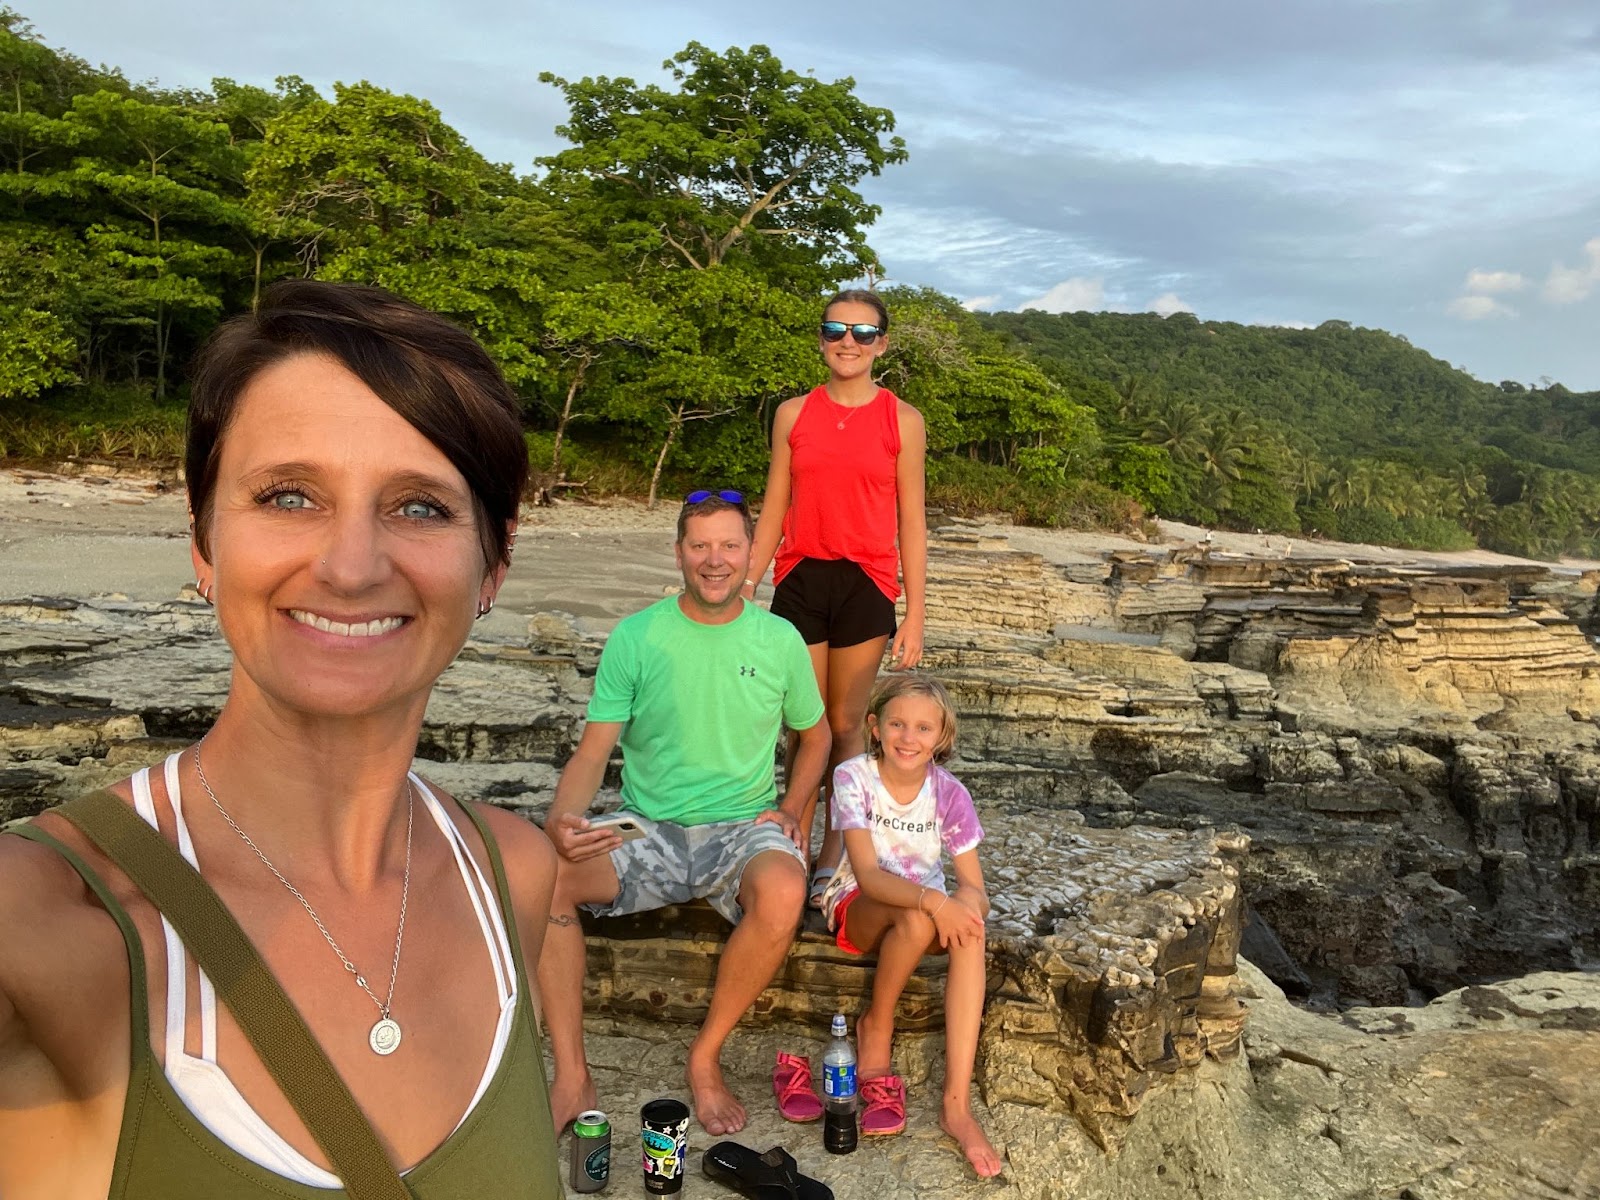 After a day of work or travel in Costa Rica the Pitts family watches the sun set on the beach!